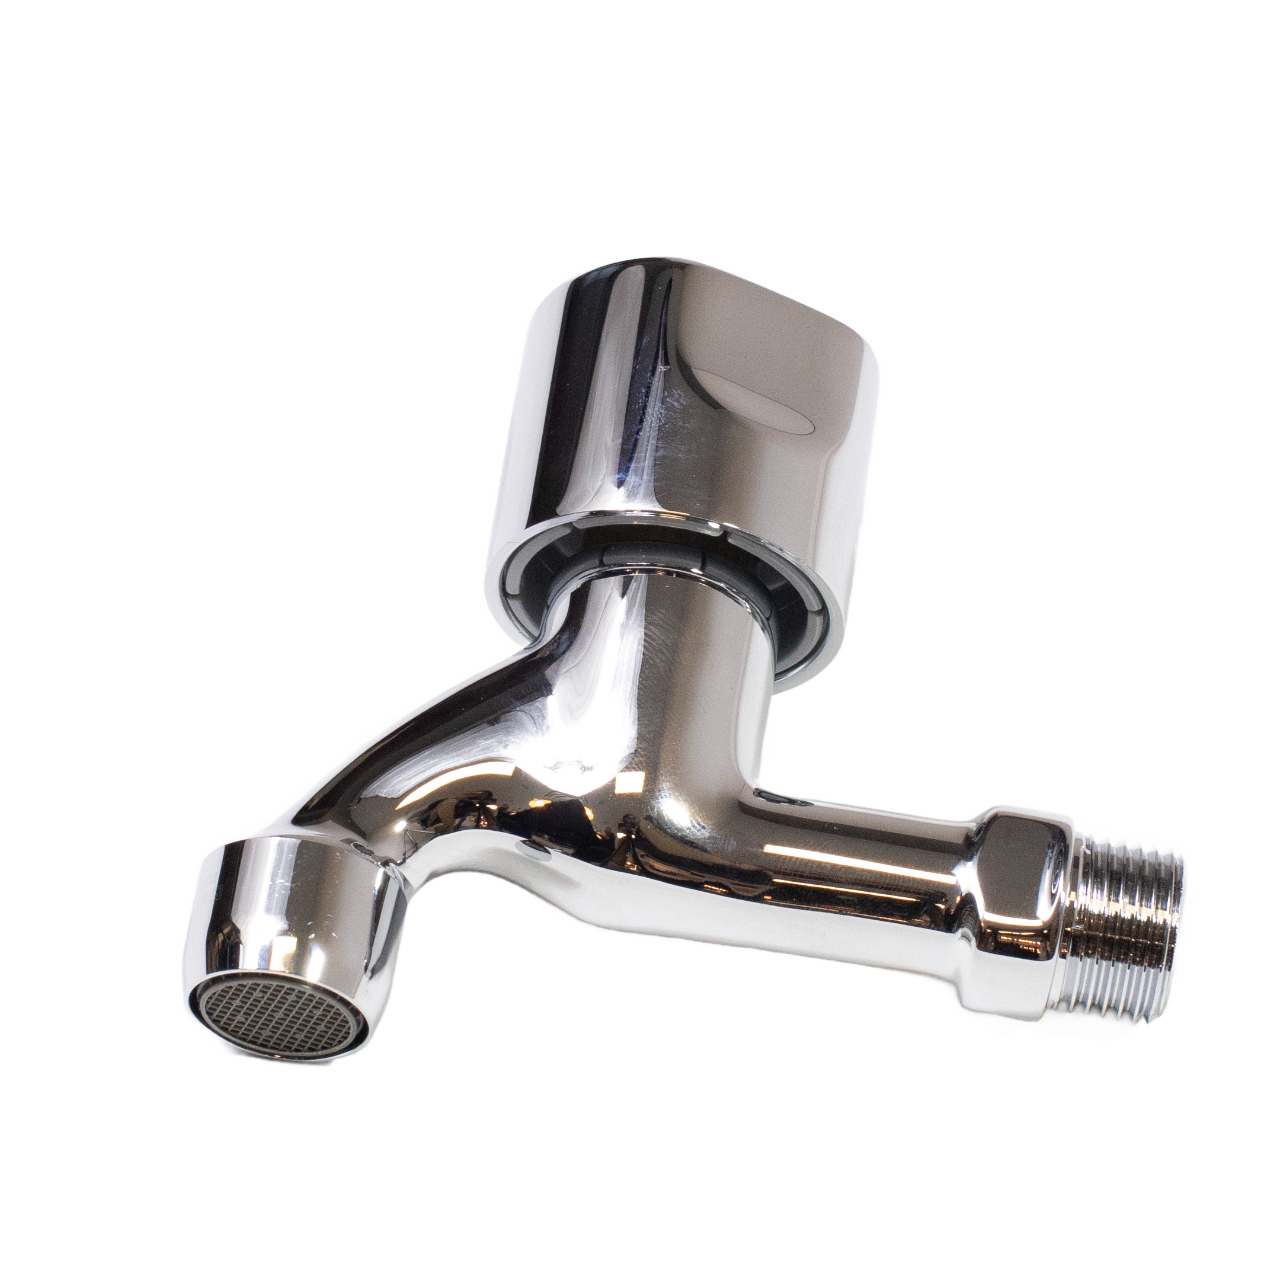 P2960 - Cold Water Faucet for Intersan Wash Basins